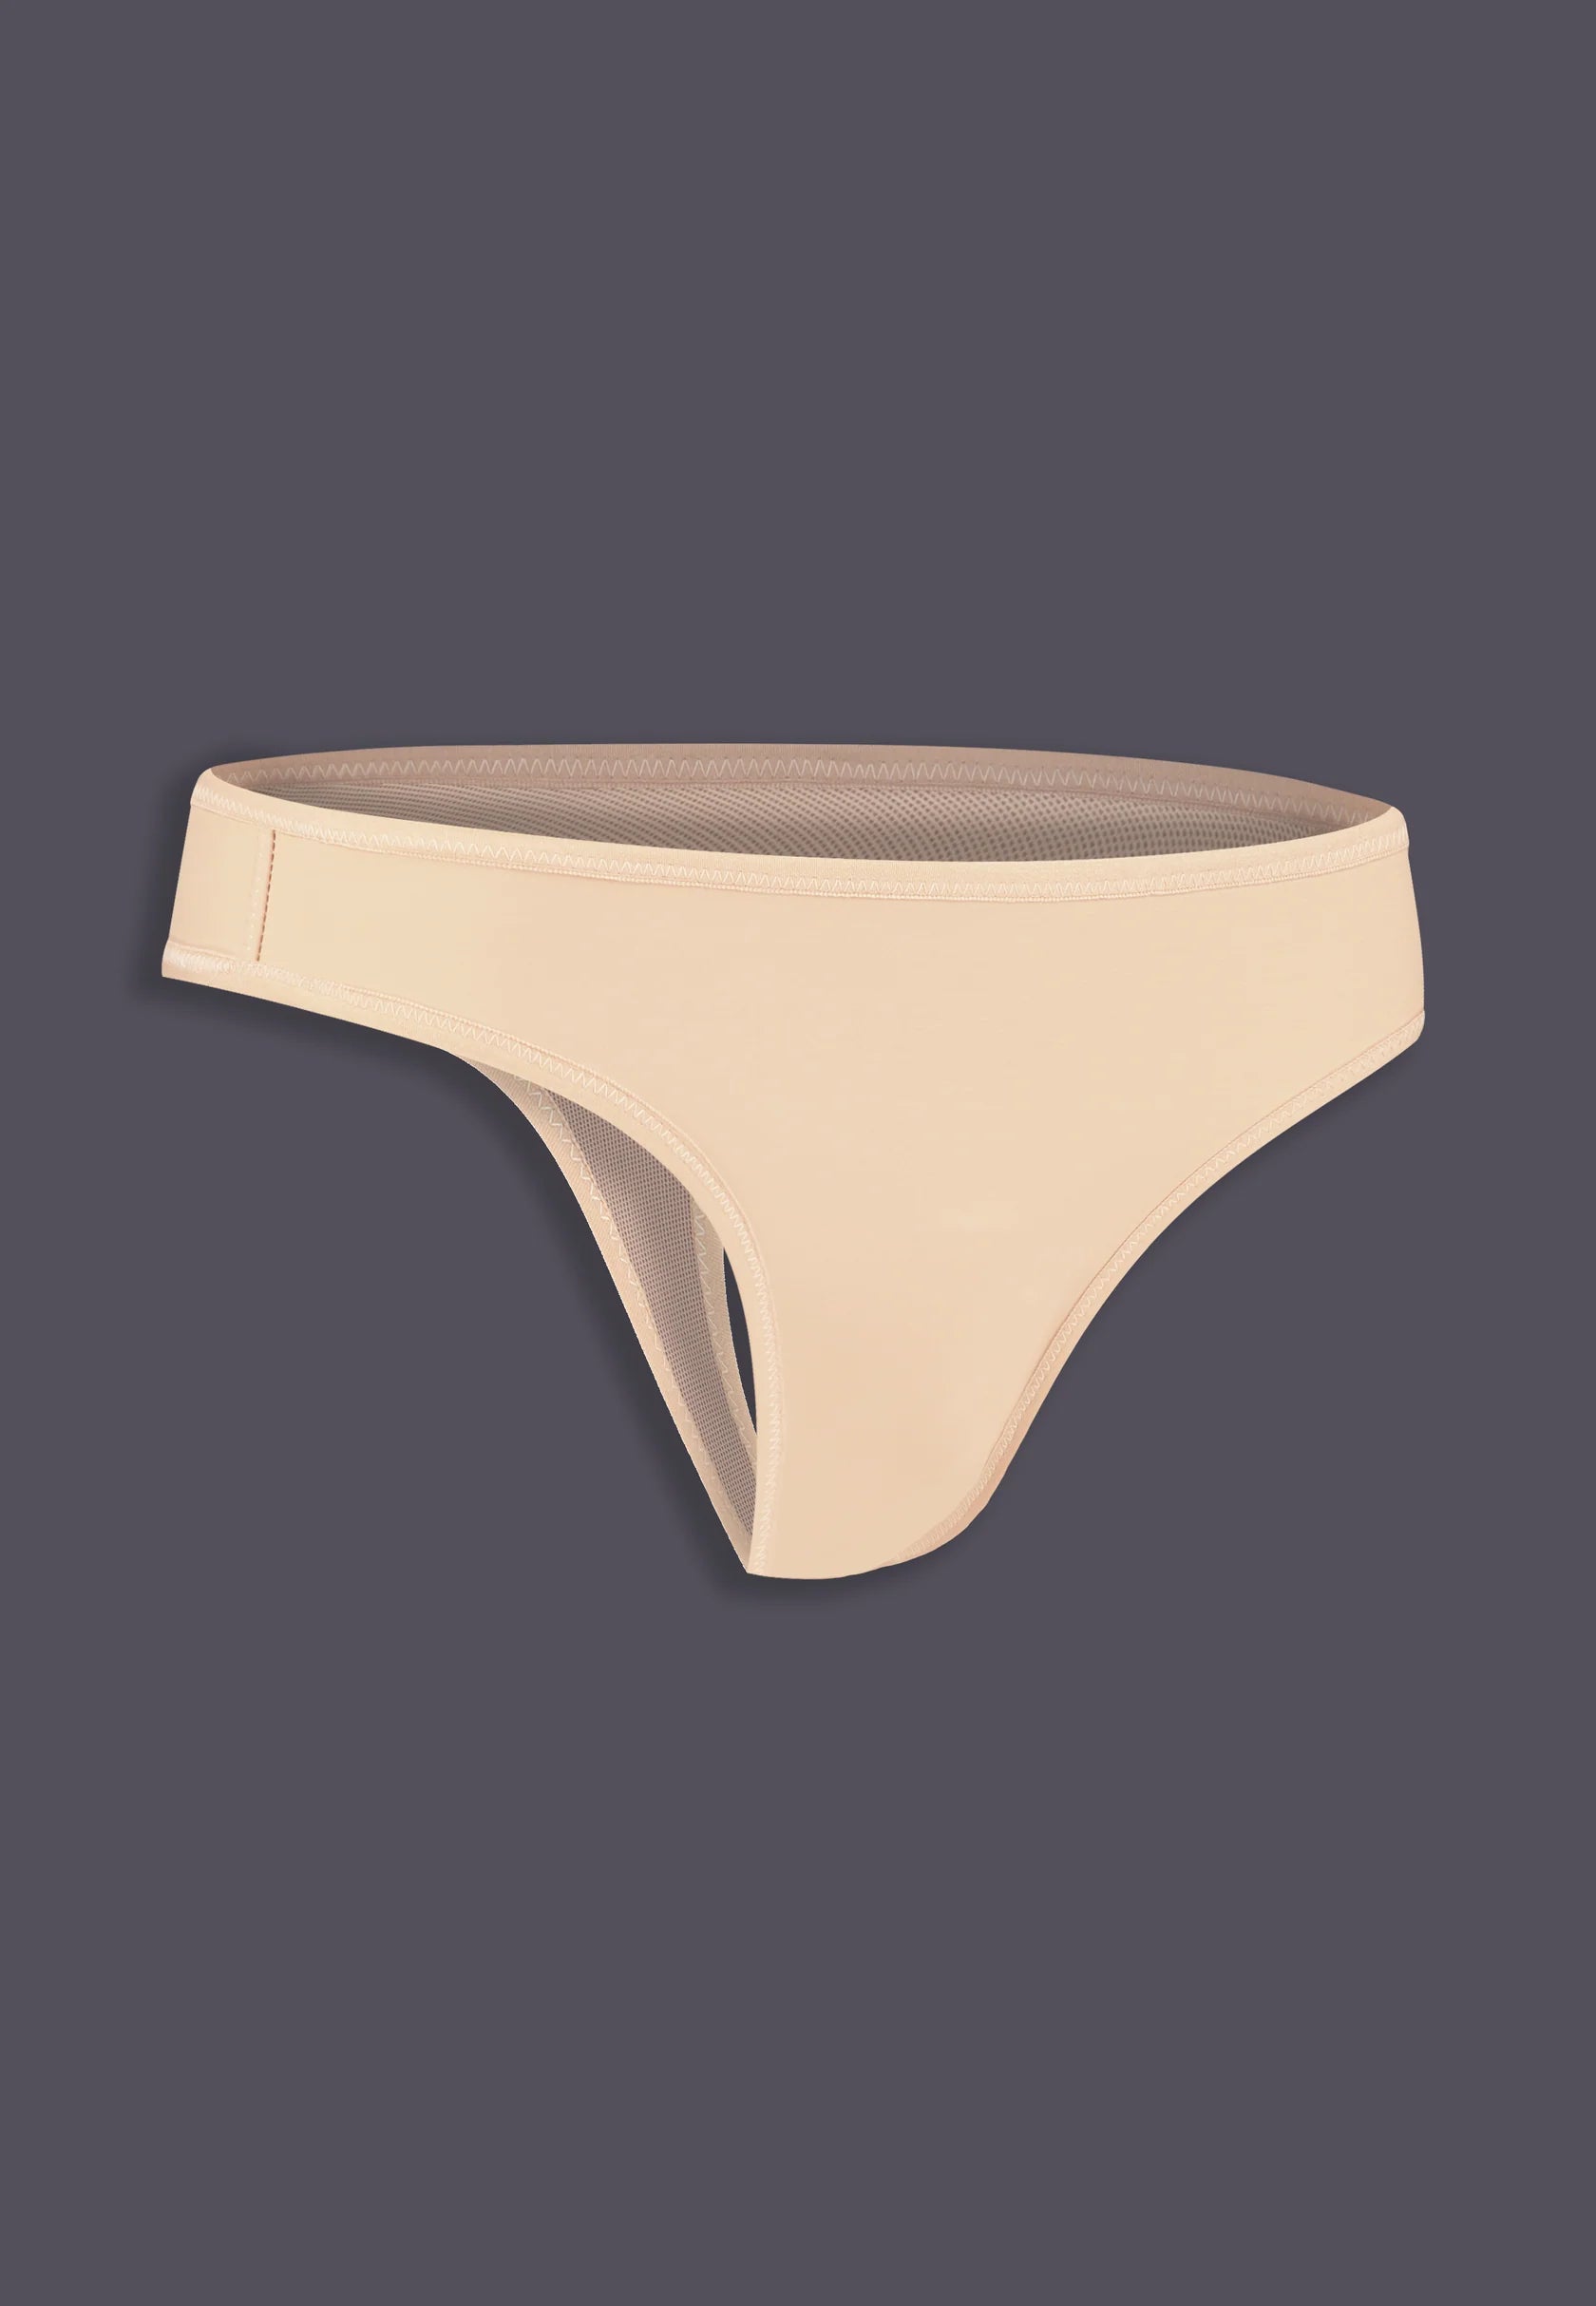 The String: MtF Tucking Thong by UNTAG